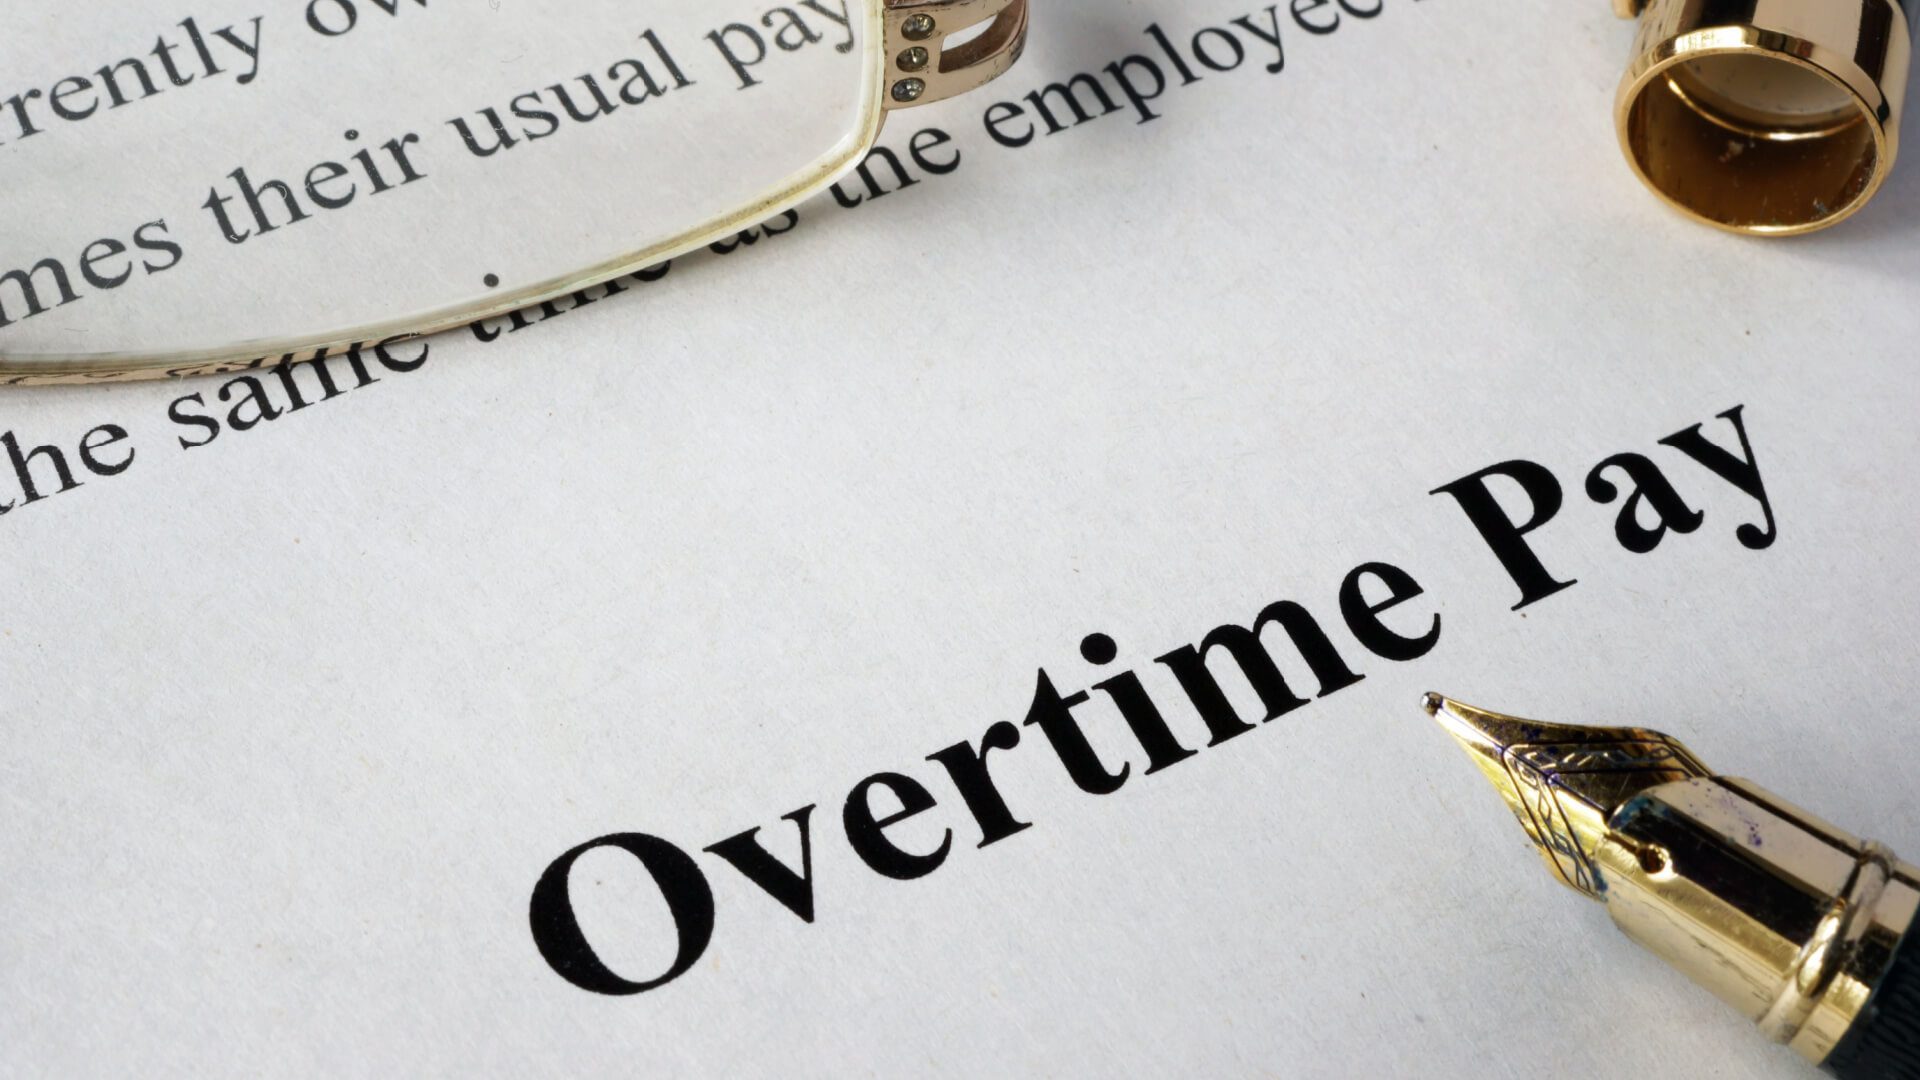 overtime pay